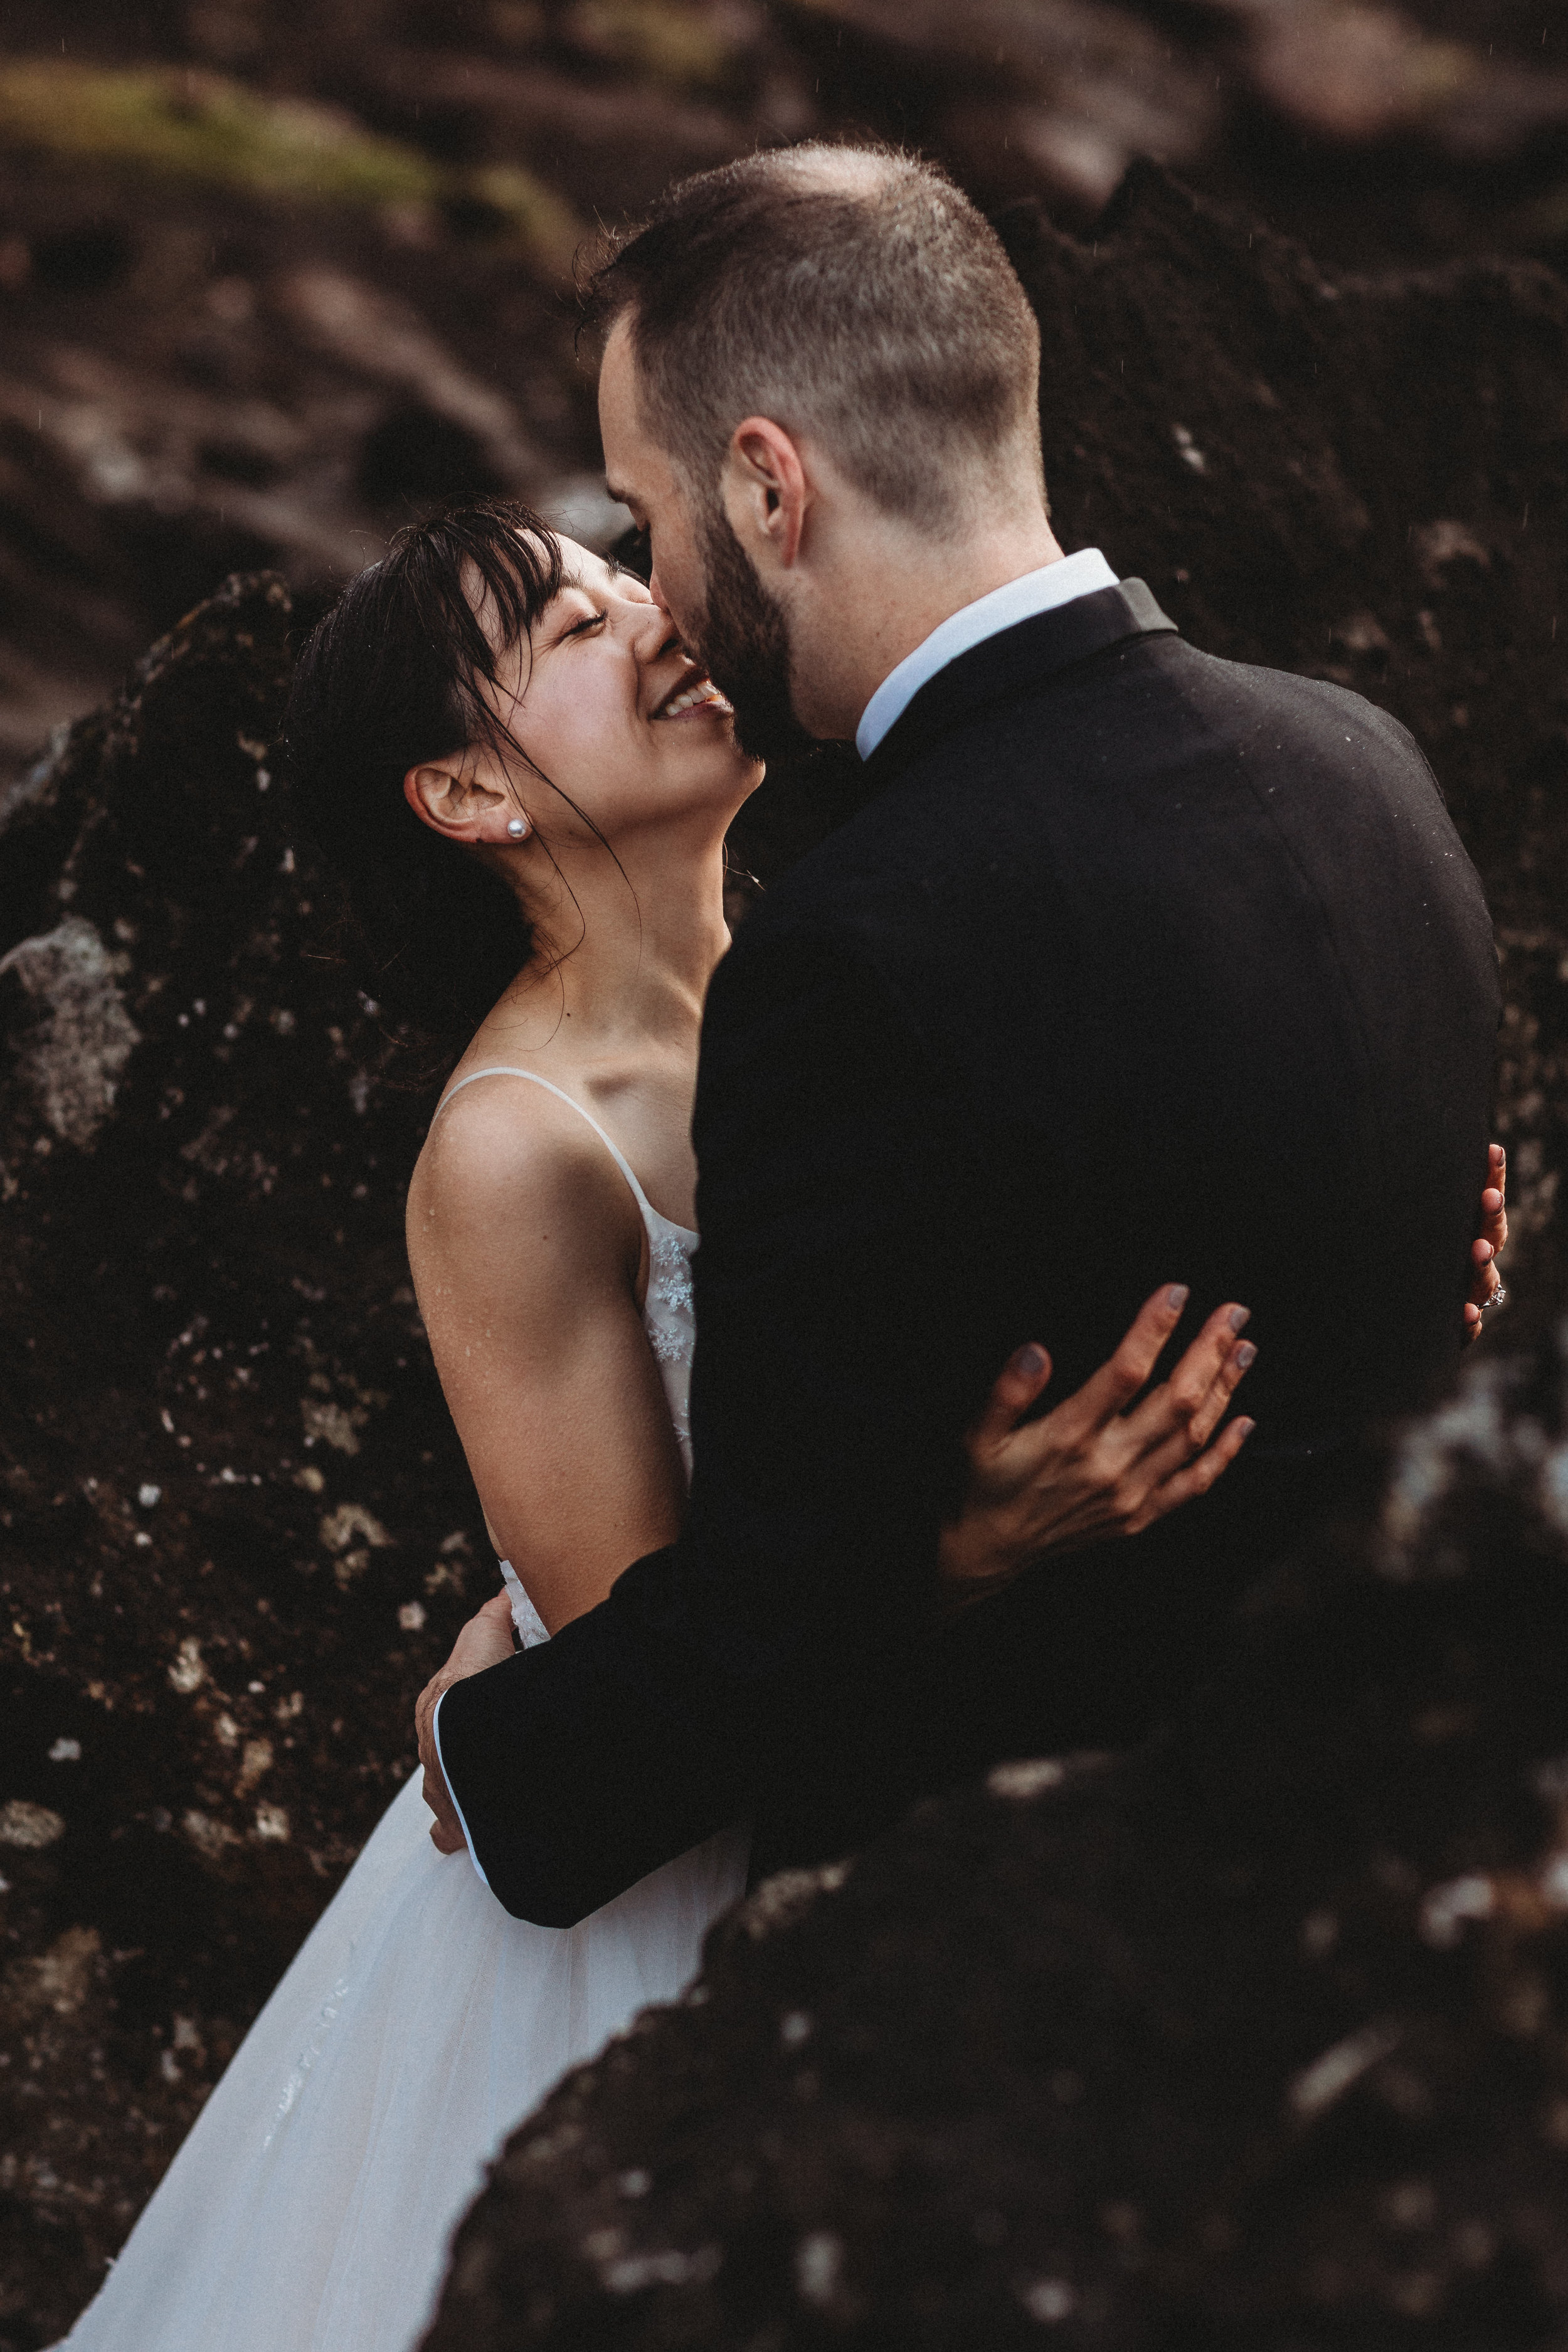 Best Iceland elopement photographer | Iceland wedding pictures